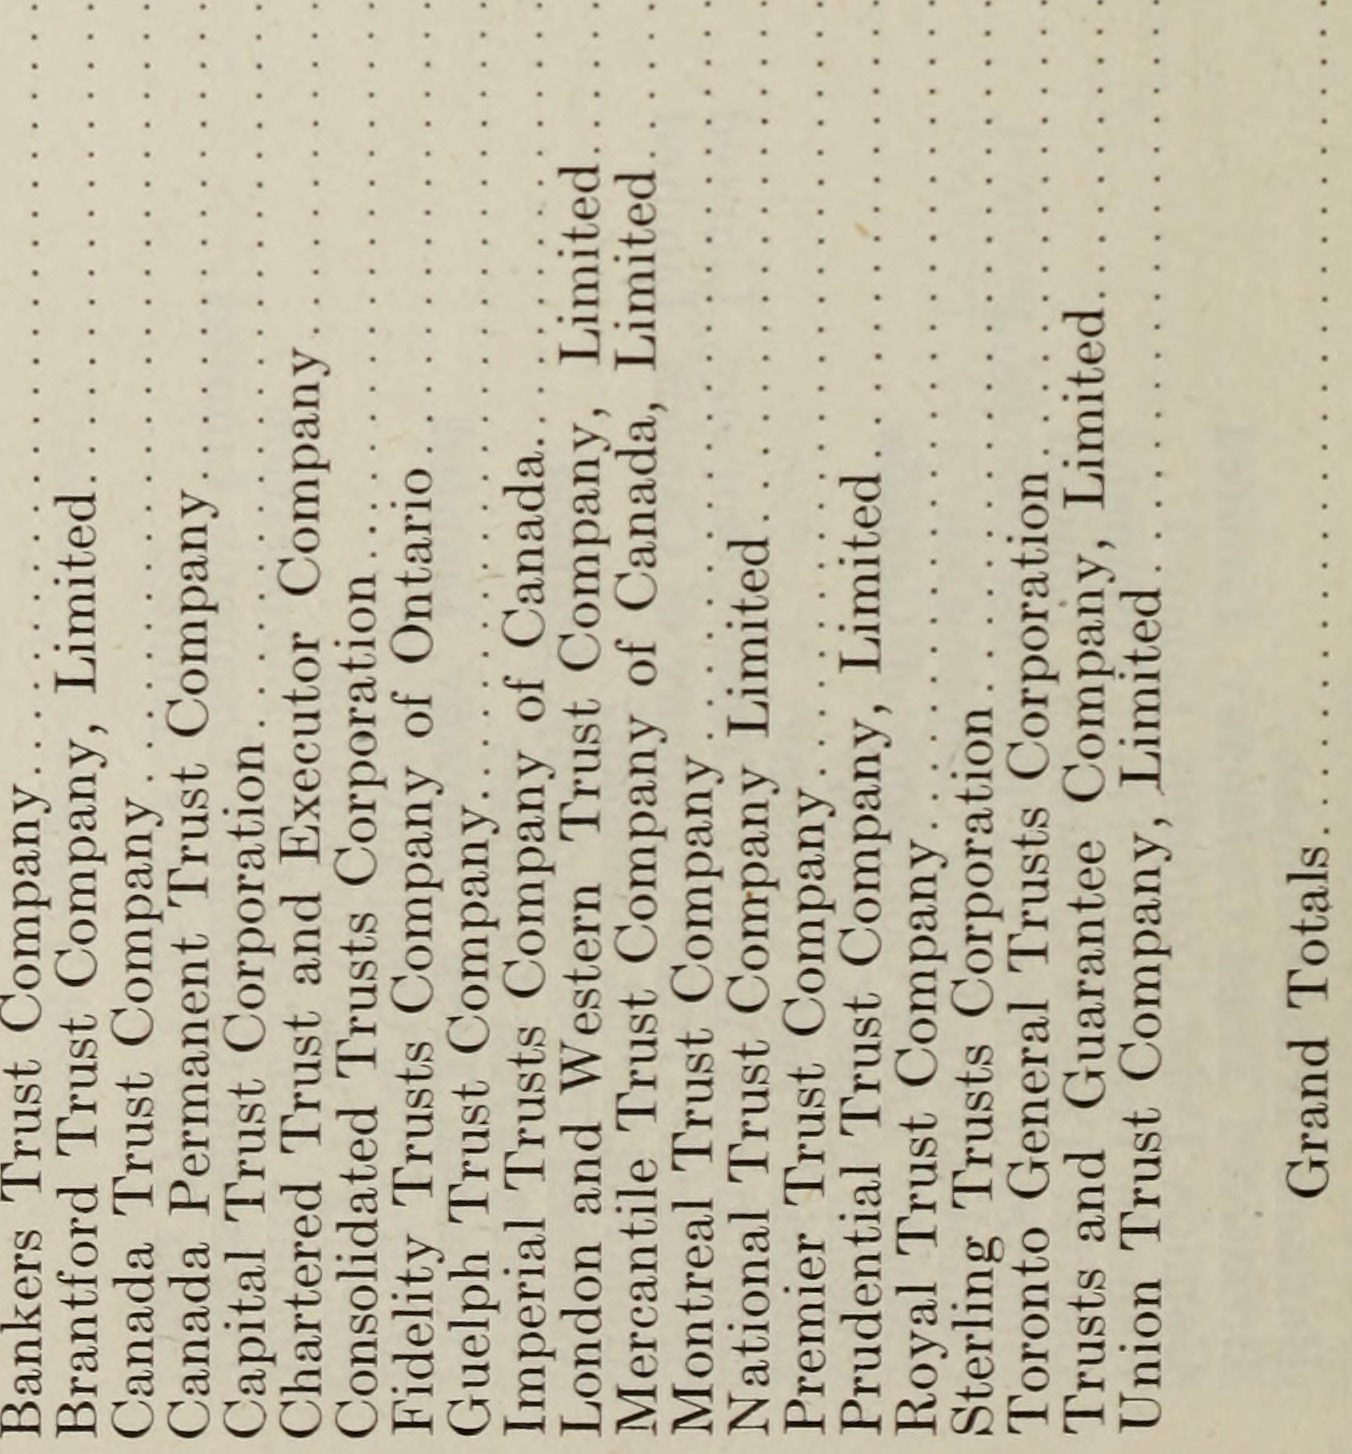 Image from page 219 of "REPORT OF THE REGISTRAR OF LOAN AND TRUST CORPORATIONS, ONTARIO for the year 1920" (1920)